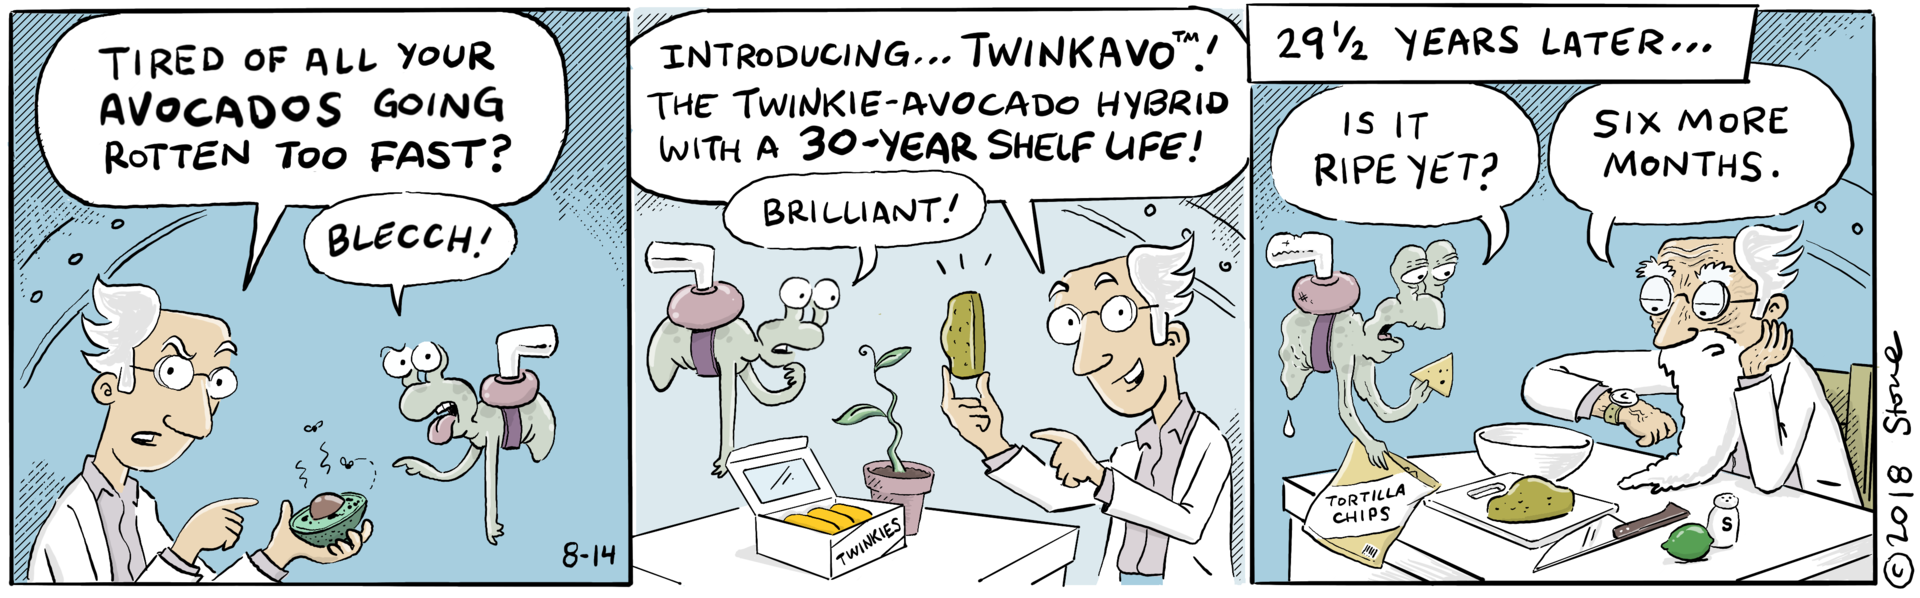 Zeno's genetically modified avocados become self-aware and wreak havok in the lab. (Part 2)